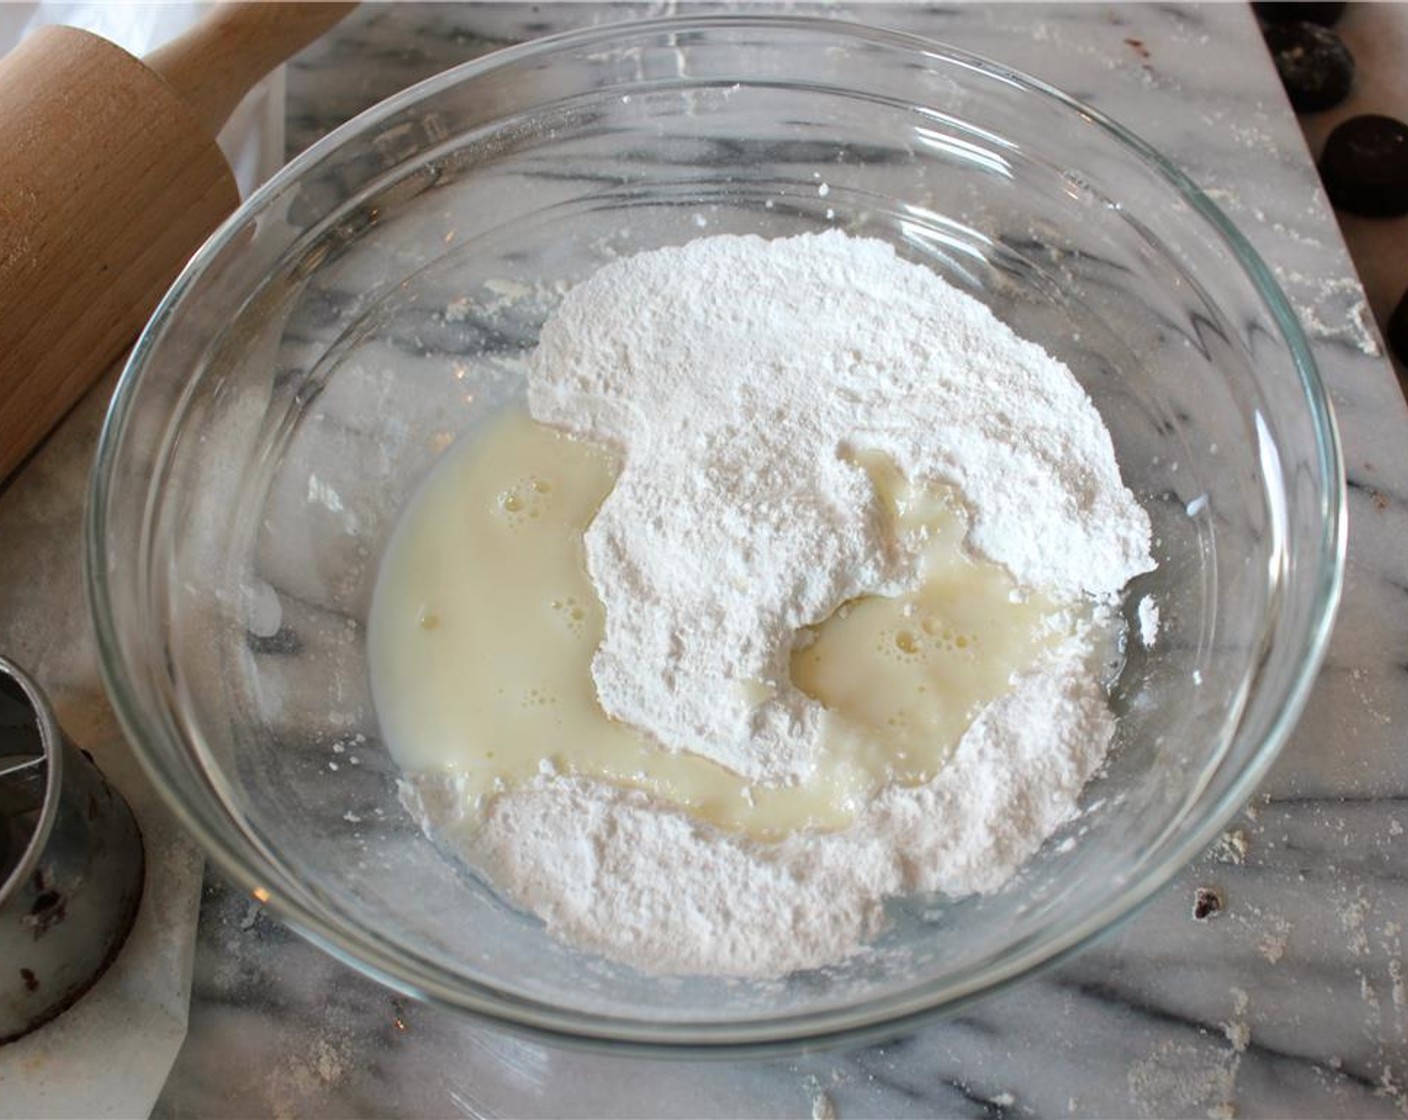 step 12 While muffins are baking, make the glaze by mixing Powdered Confectioners Sugar (1 cup), Milk (2 Tbsp), Butter (1/2 Tbsp) Vanilla Extract (1/4 tsp), and Salt (1/2 tsp).